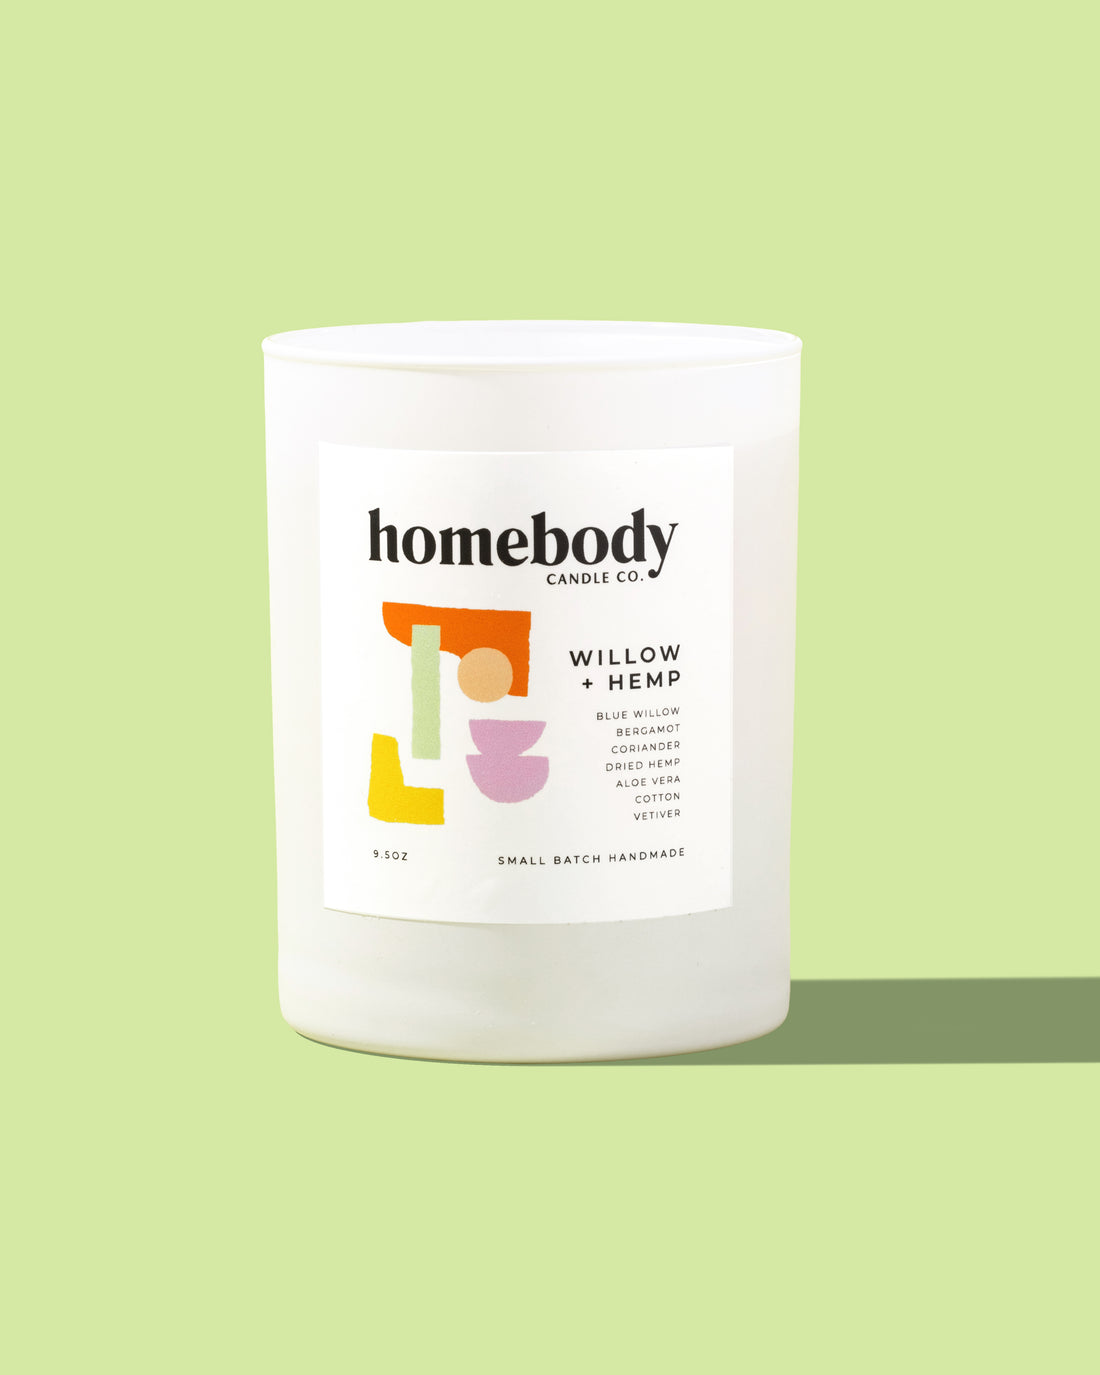 Willow + Hemp burn + bloom candle Homebody Candle Co